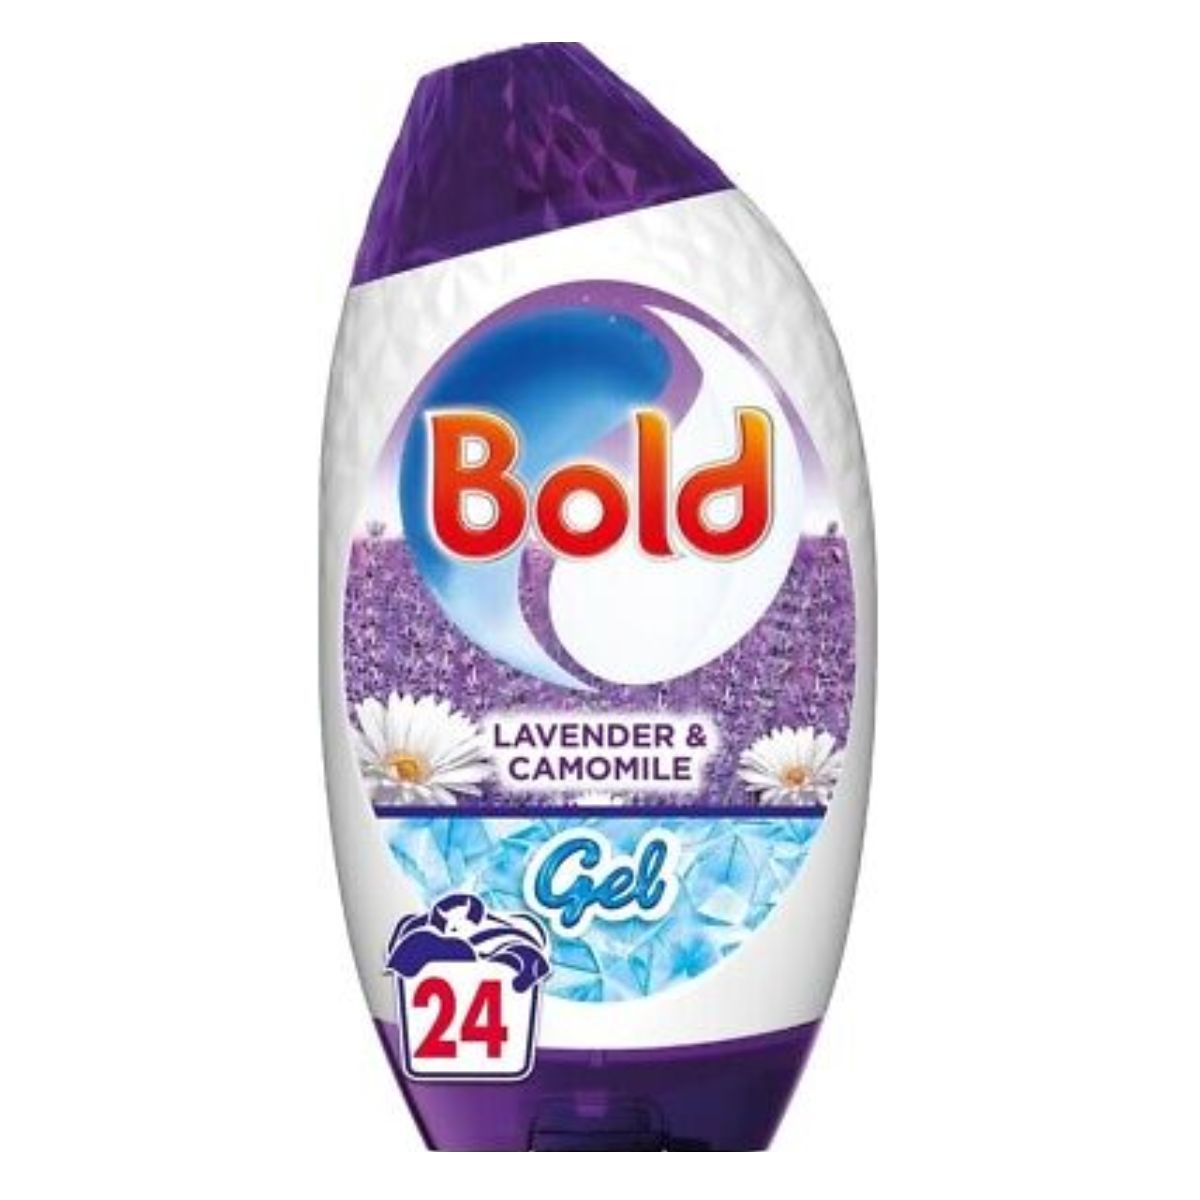 Bold - 2 in 1 Lavender and Camomile Washing Liquid Gel 24 Washes - 840ml